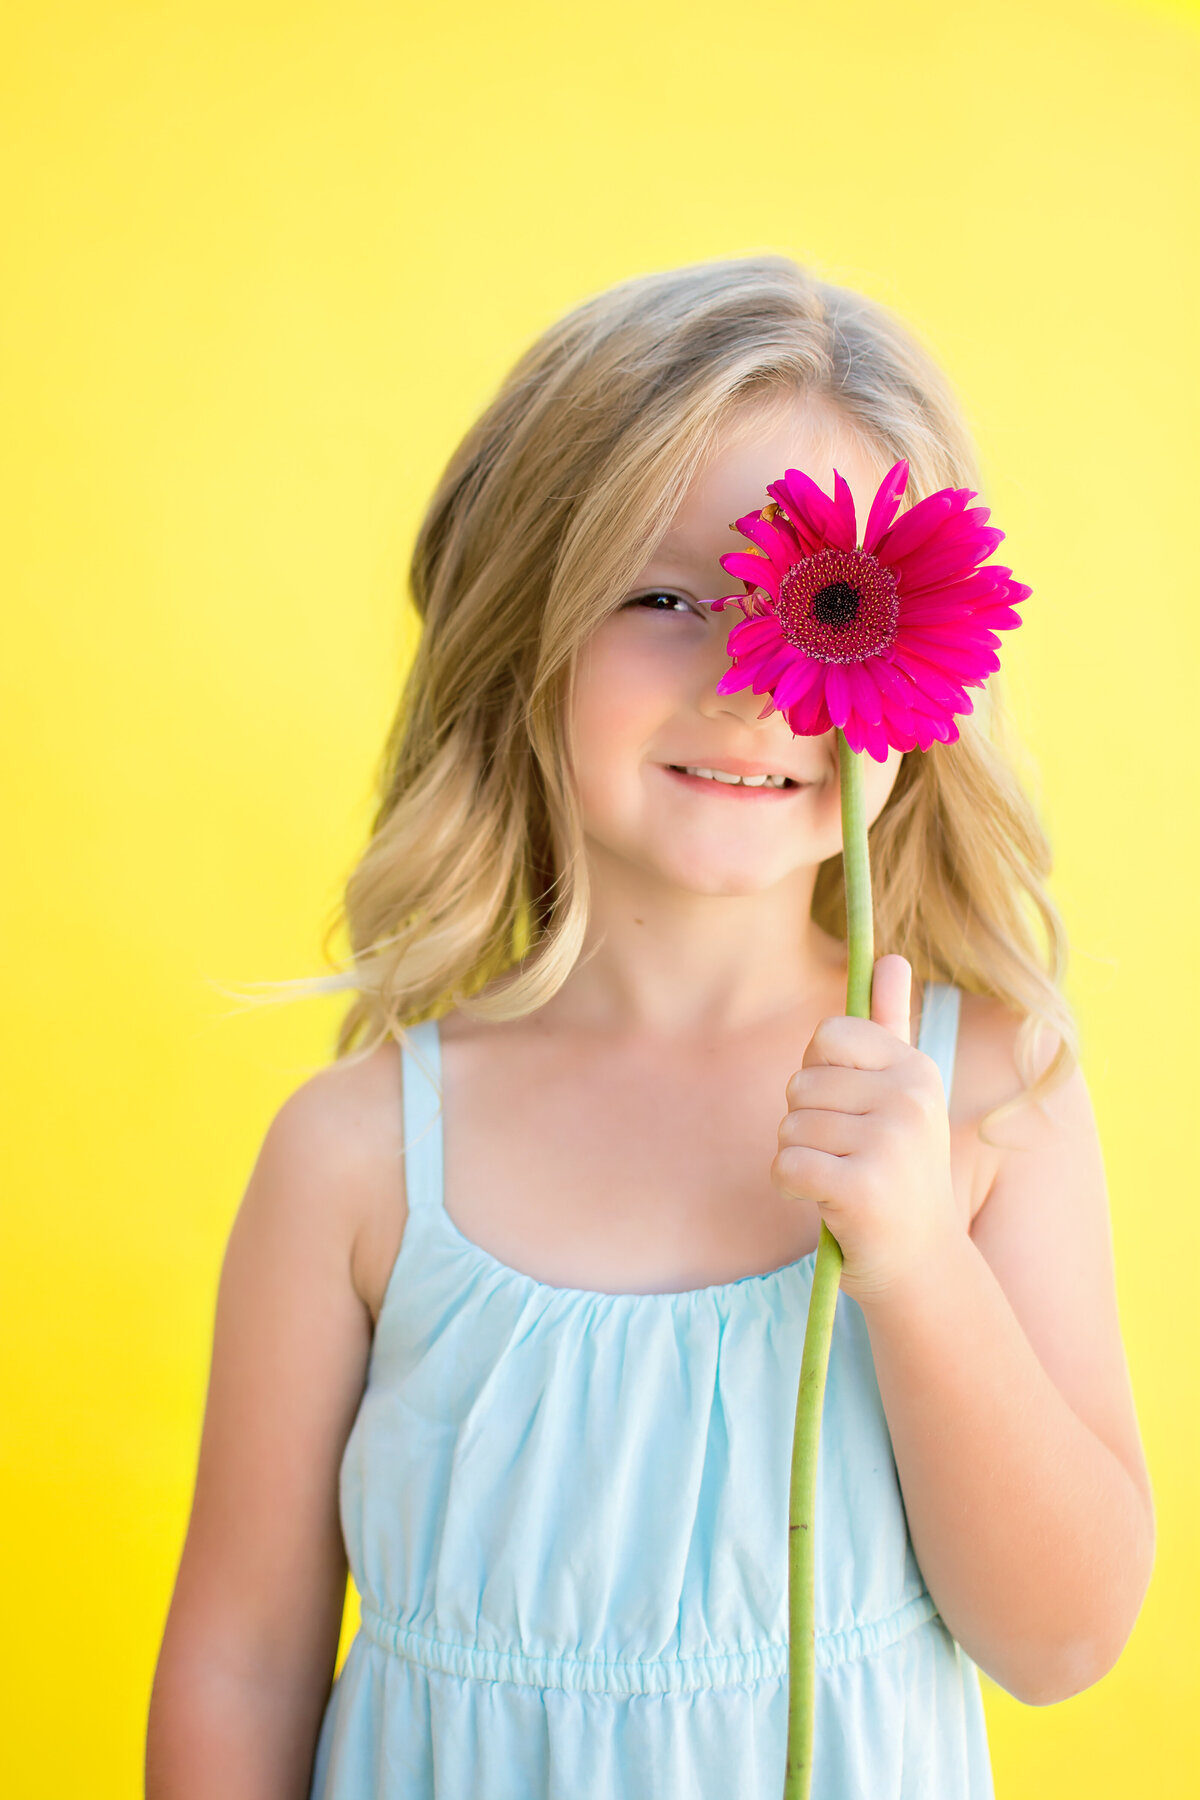 Young girl standing on yellow backgroun with blue dress and a bright pink flower in front of her eye.